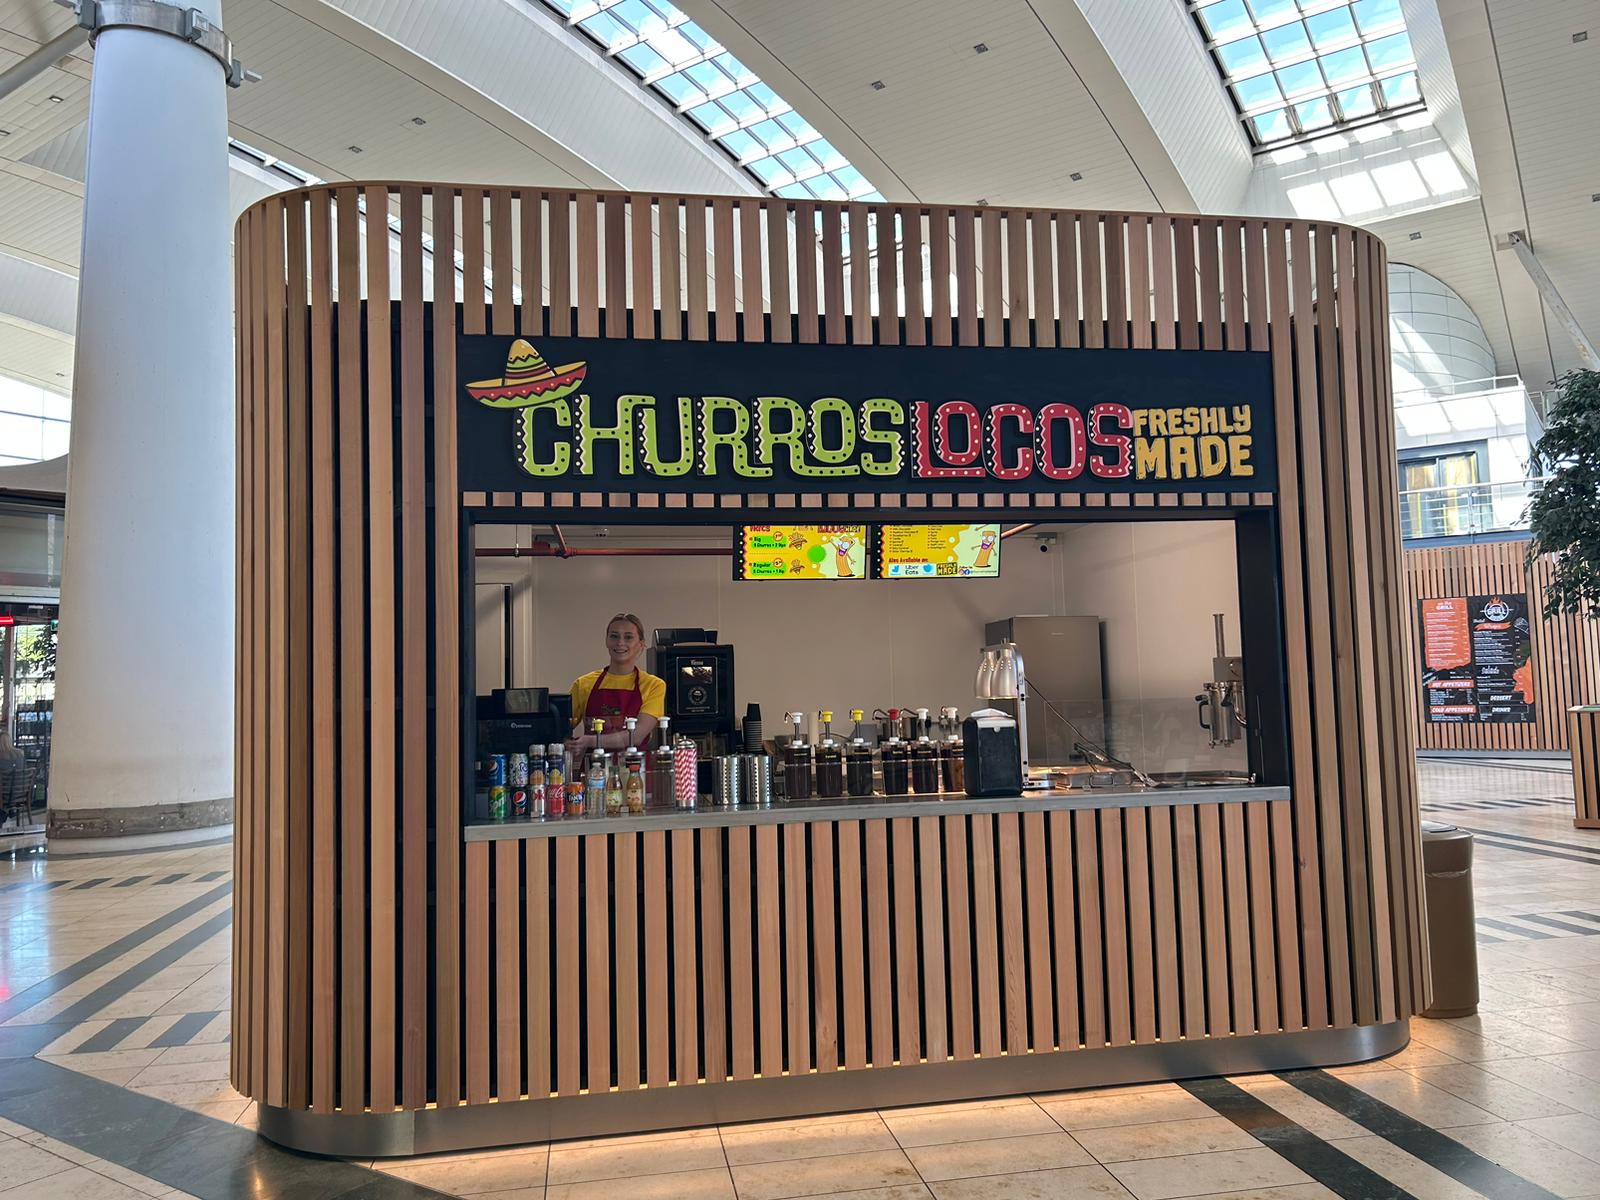 Midsummer Place goes loco for Churros!